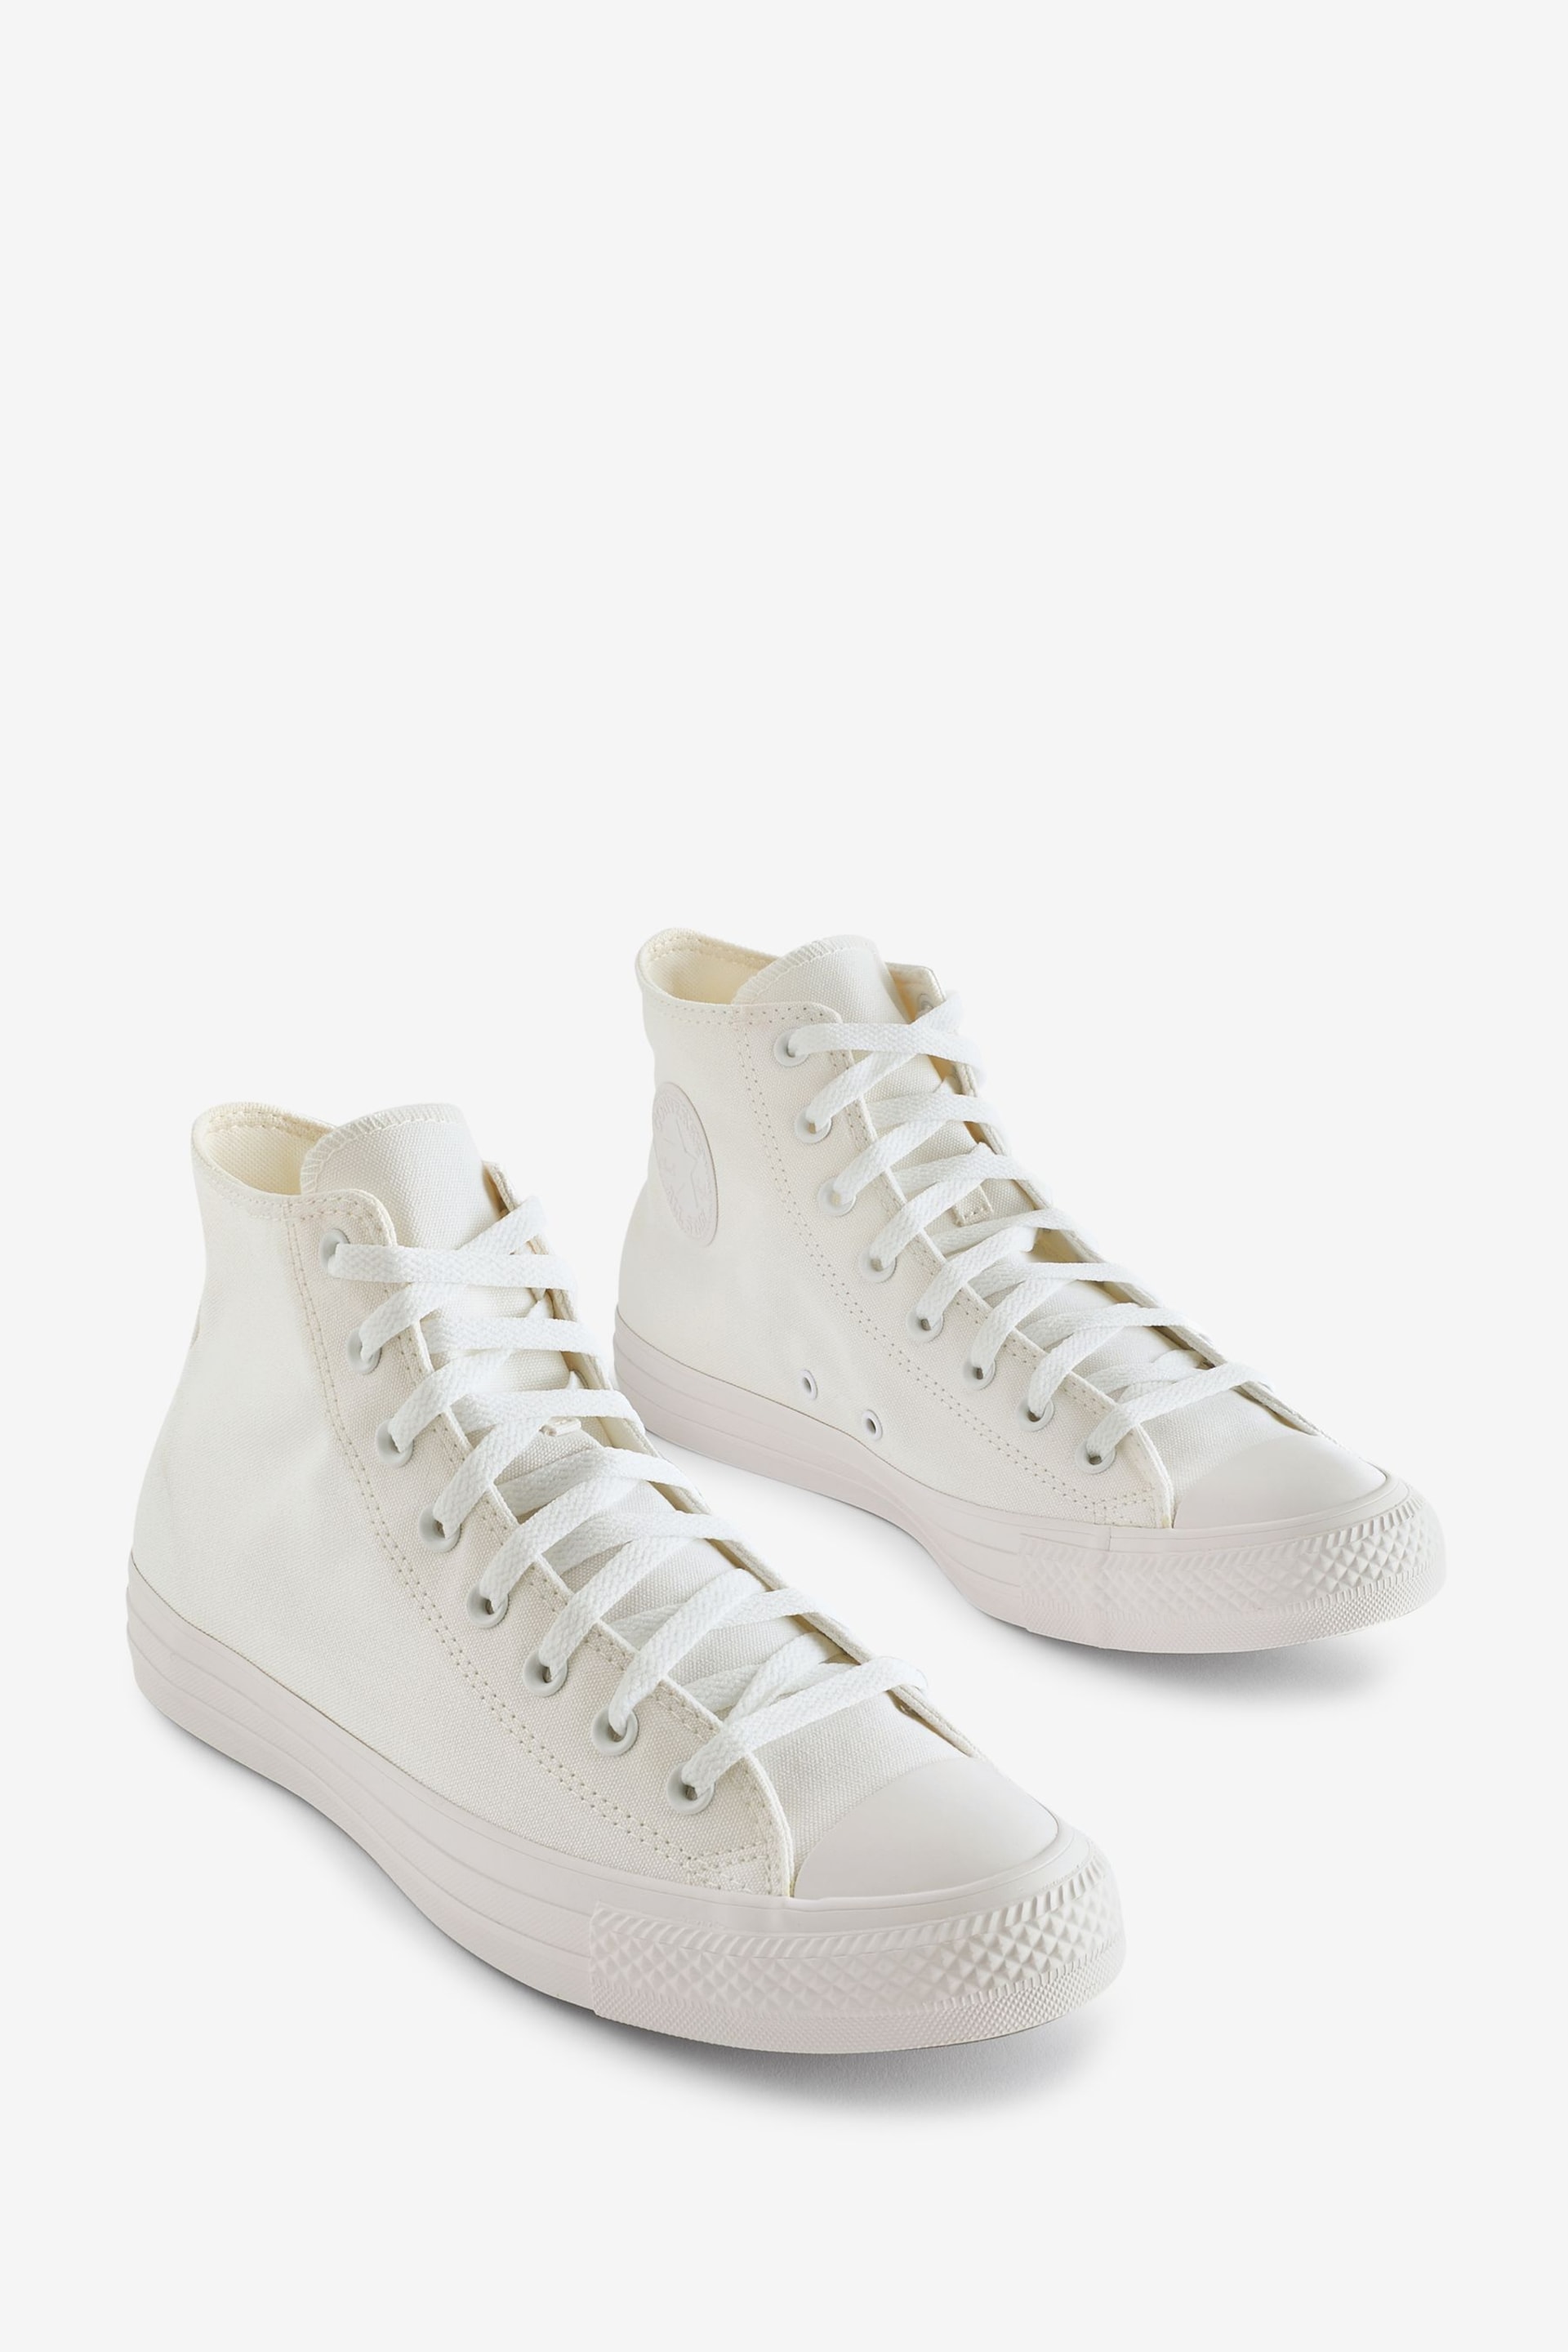 Converse White Chuck High Trainers - Image 3 of 9